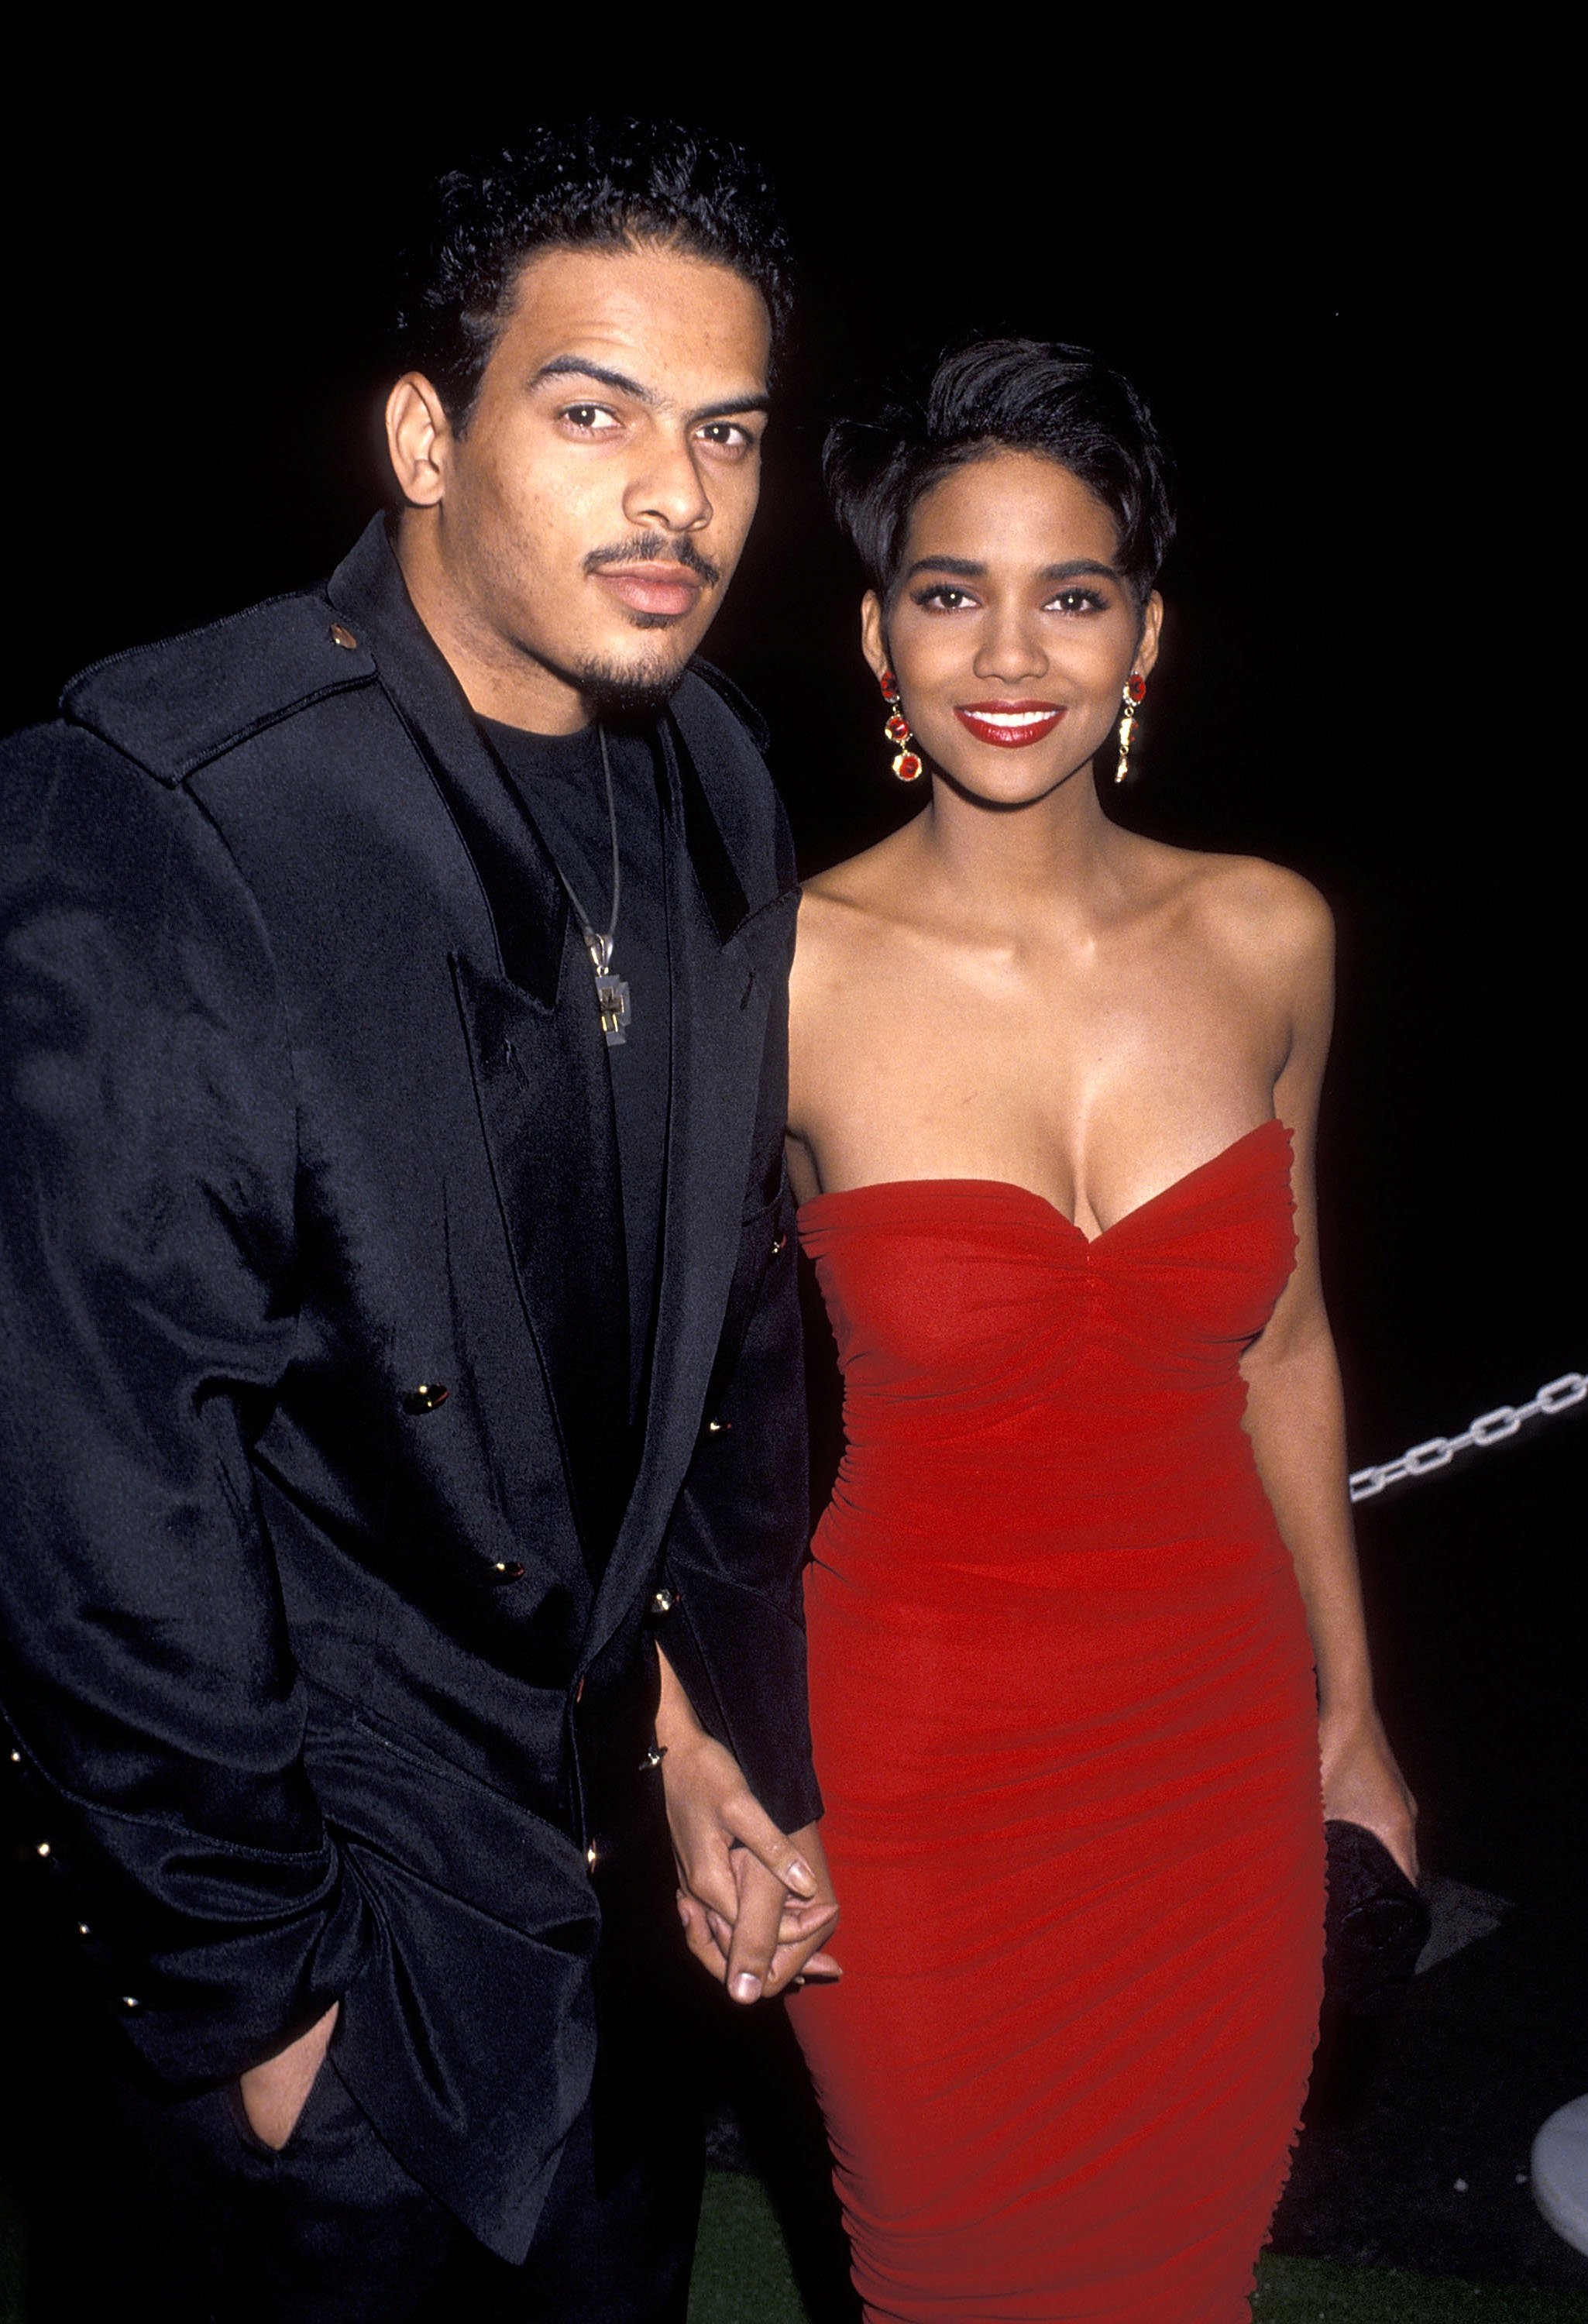 Halle Berry and Christopher Williams at the 24th Annual NAACP Image Awards at Wiltern Theatre in 1992 in Los Angeles, California | Photo: Ron Galella, Ltd./Ron Galella Collection via Getty Images